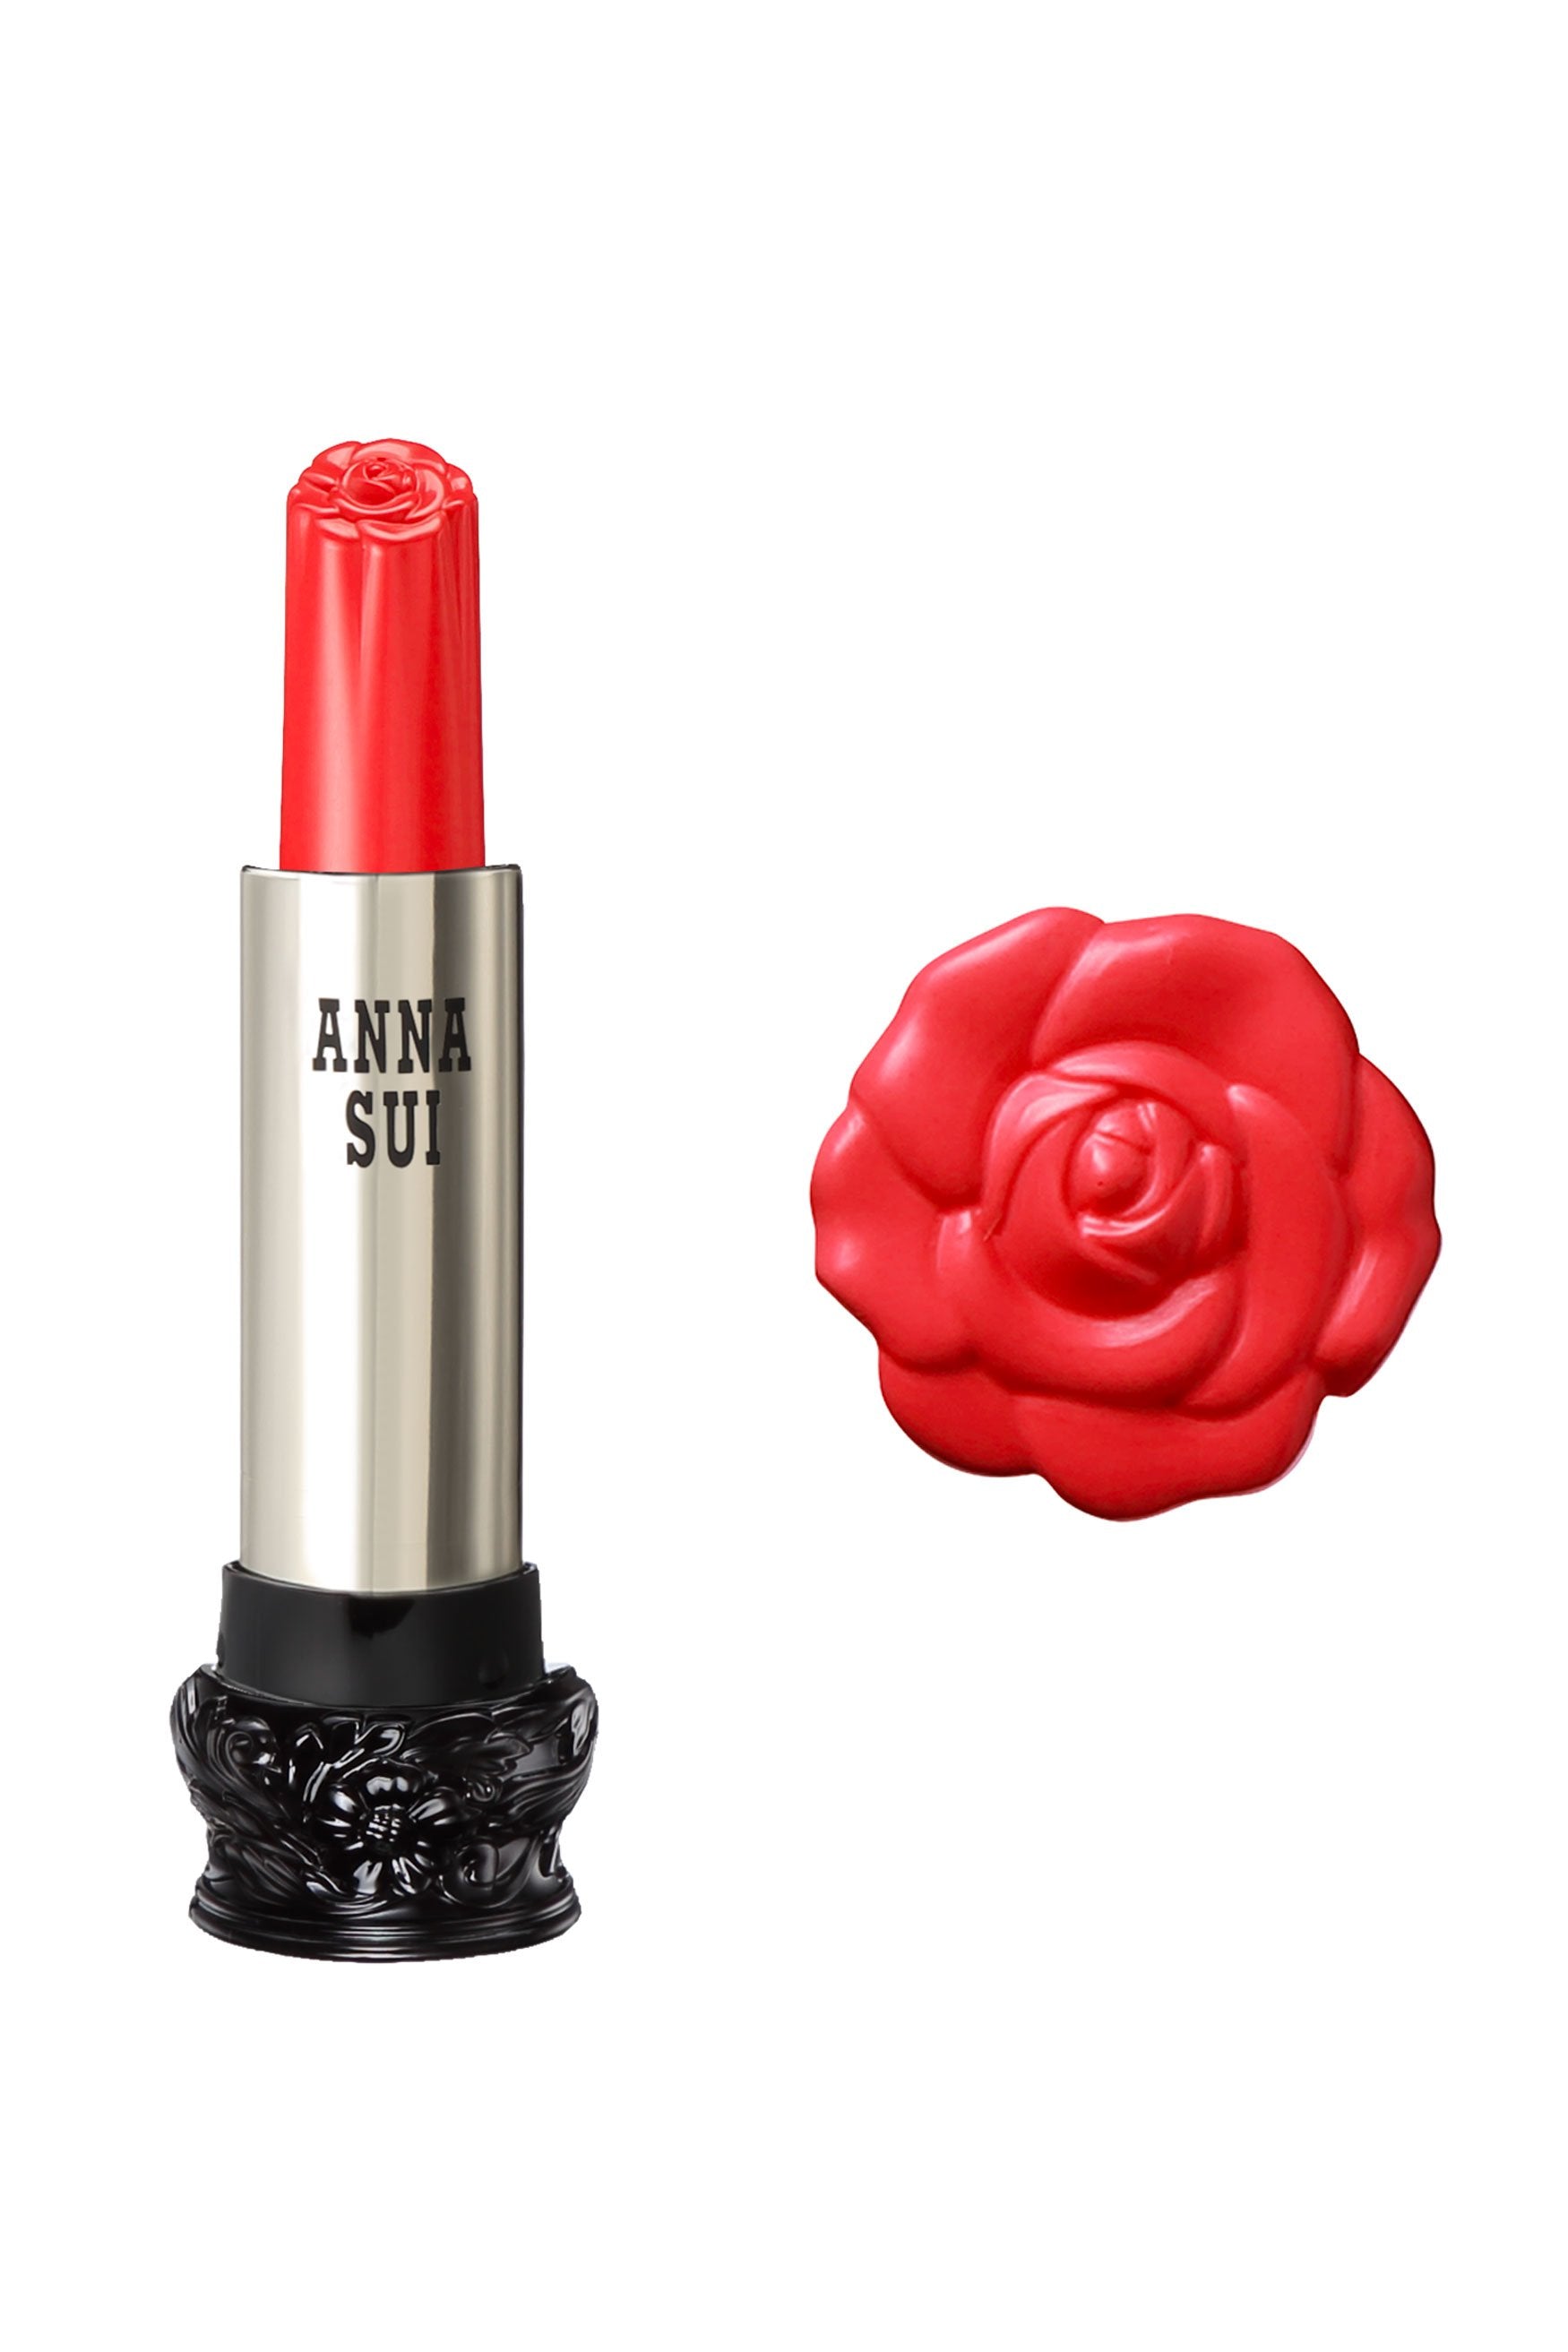 402 - Bright Rose, in a cylindrical container, large black base, engraved floral design, metallic body